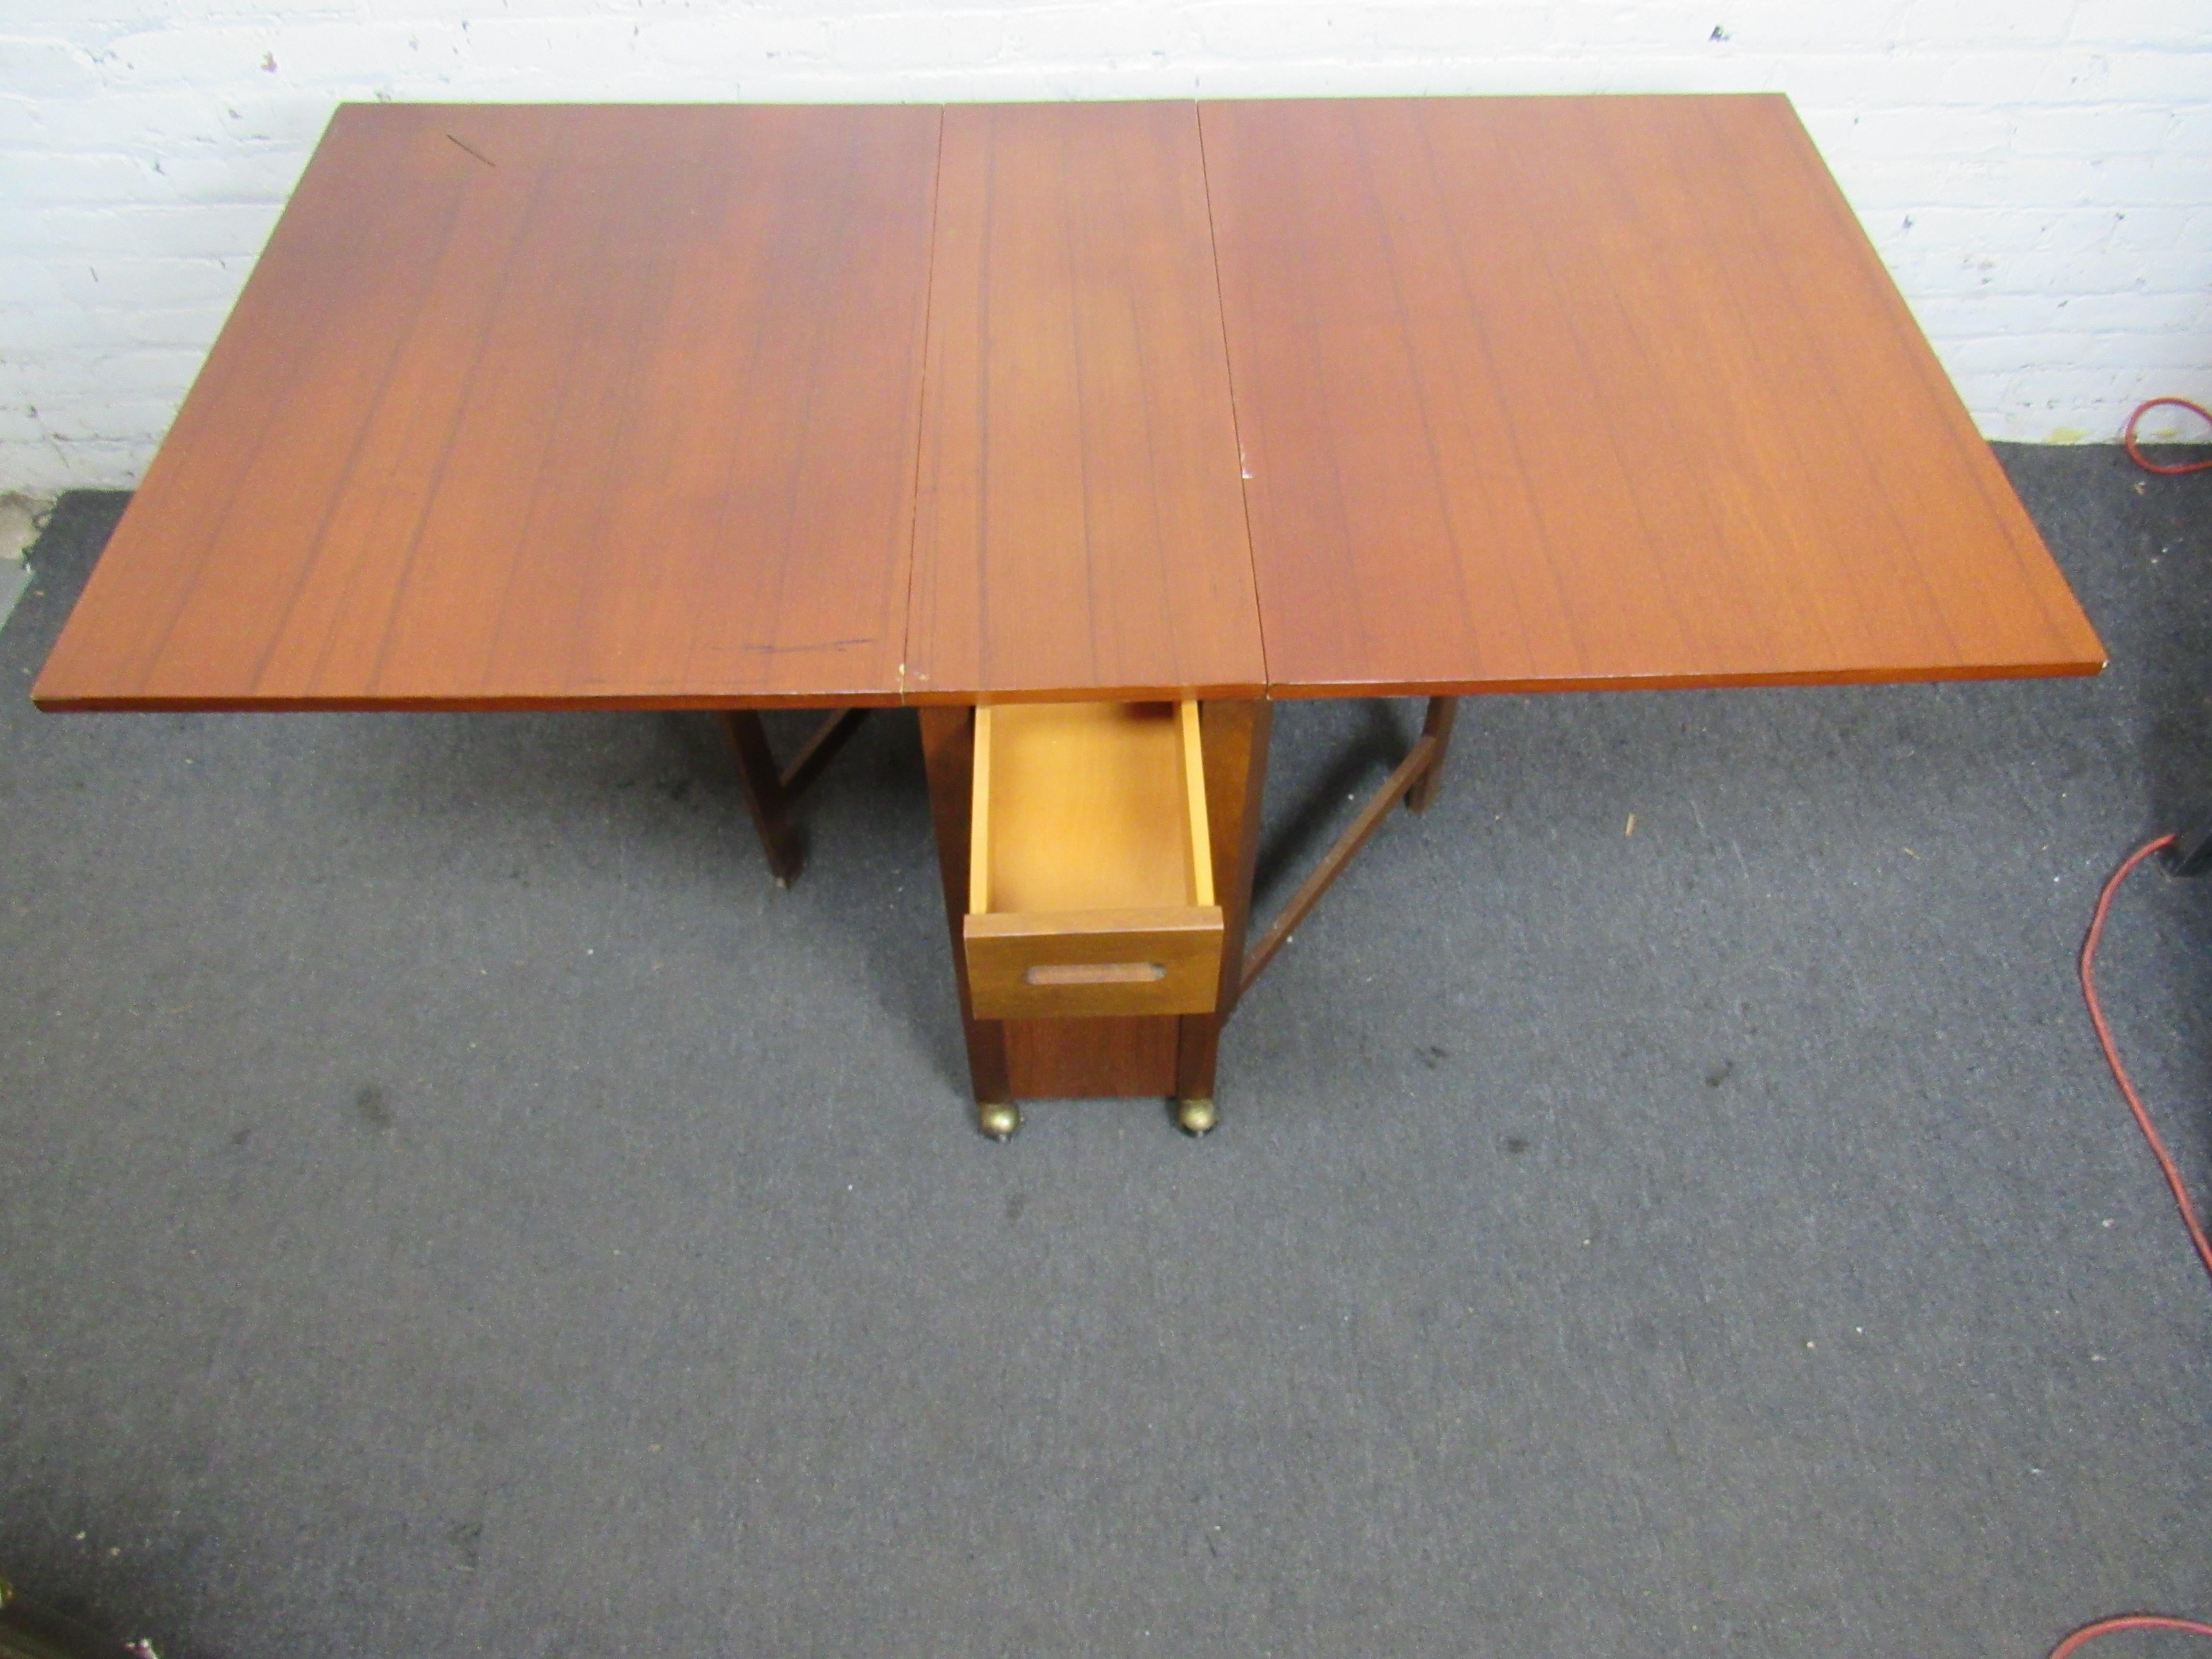 drop leaf table with chairs inside